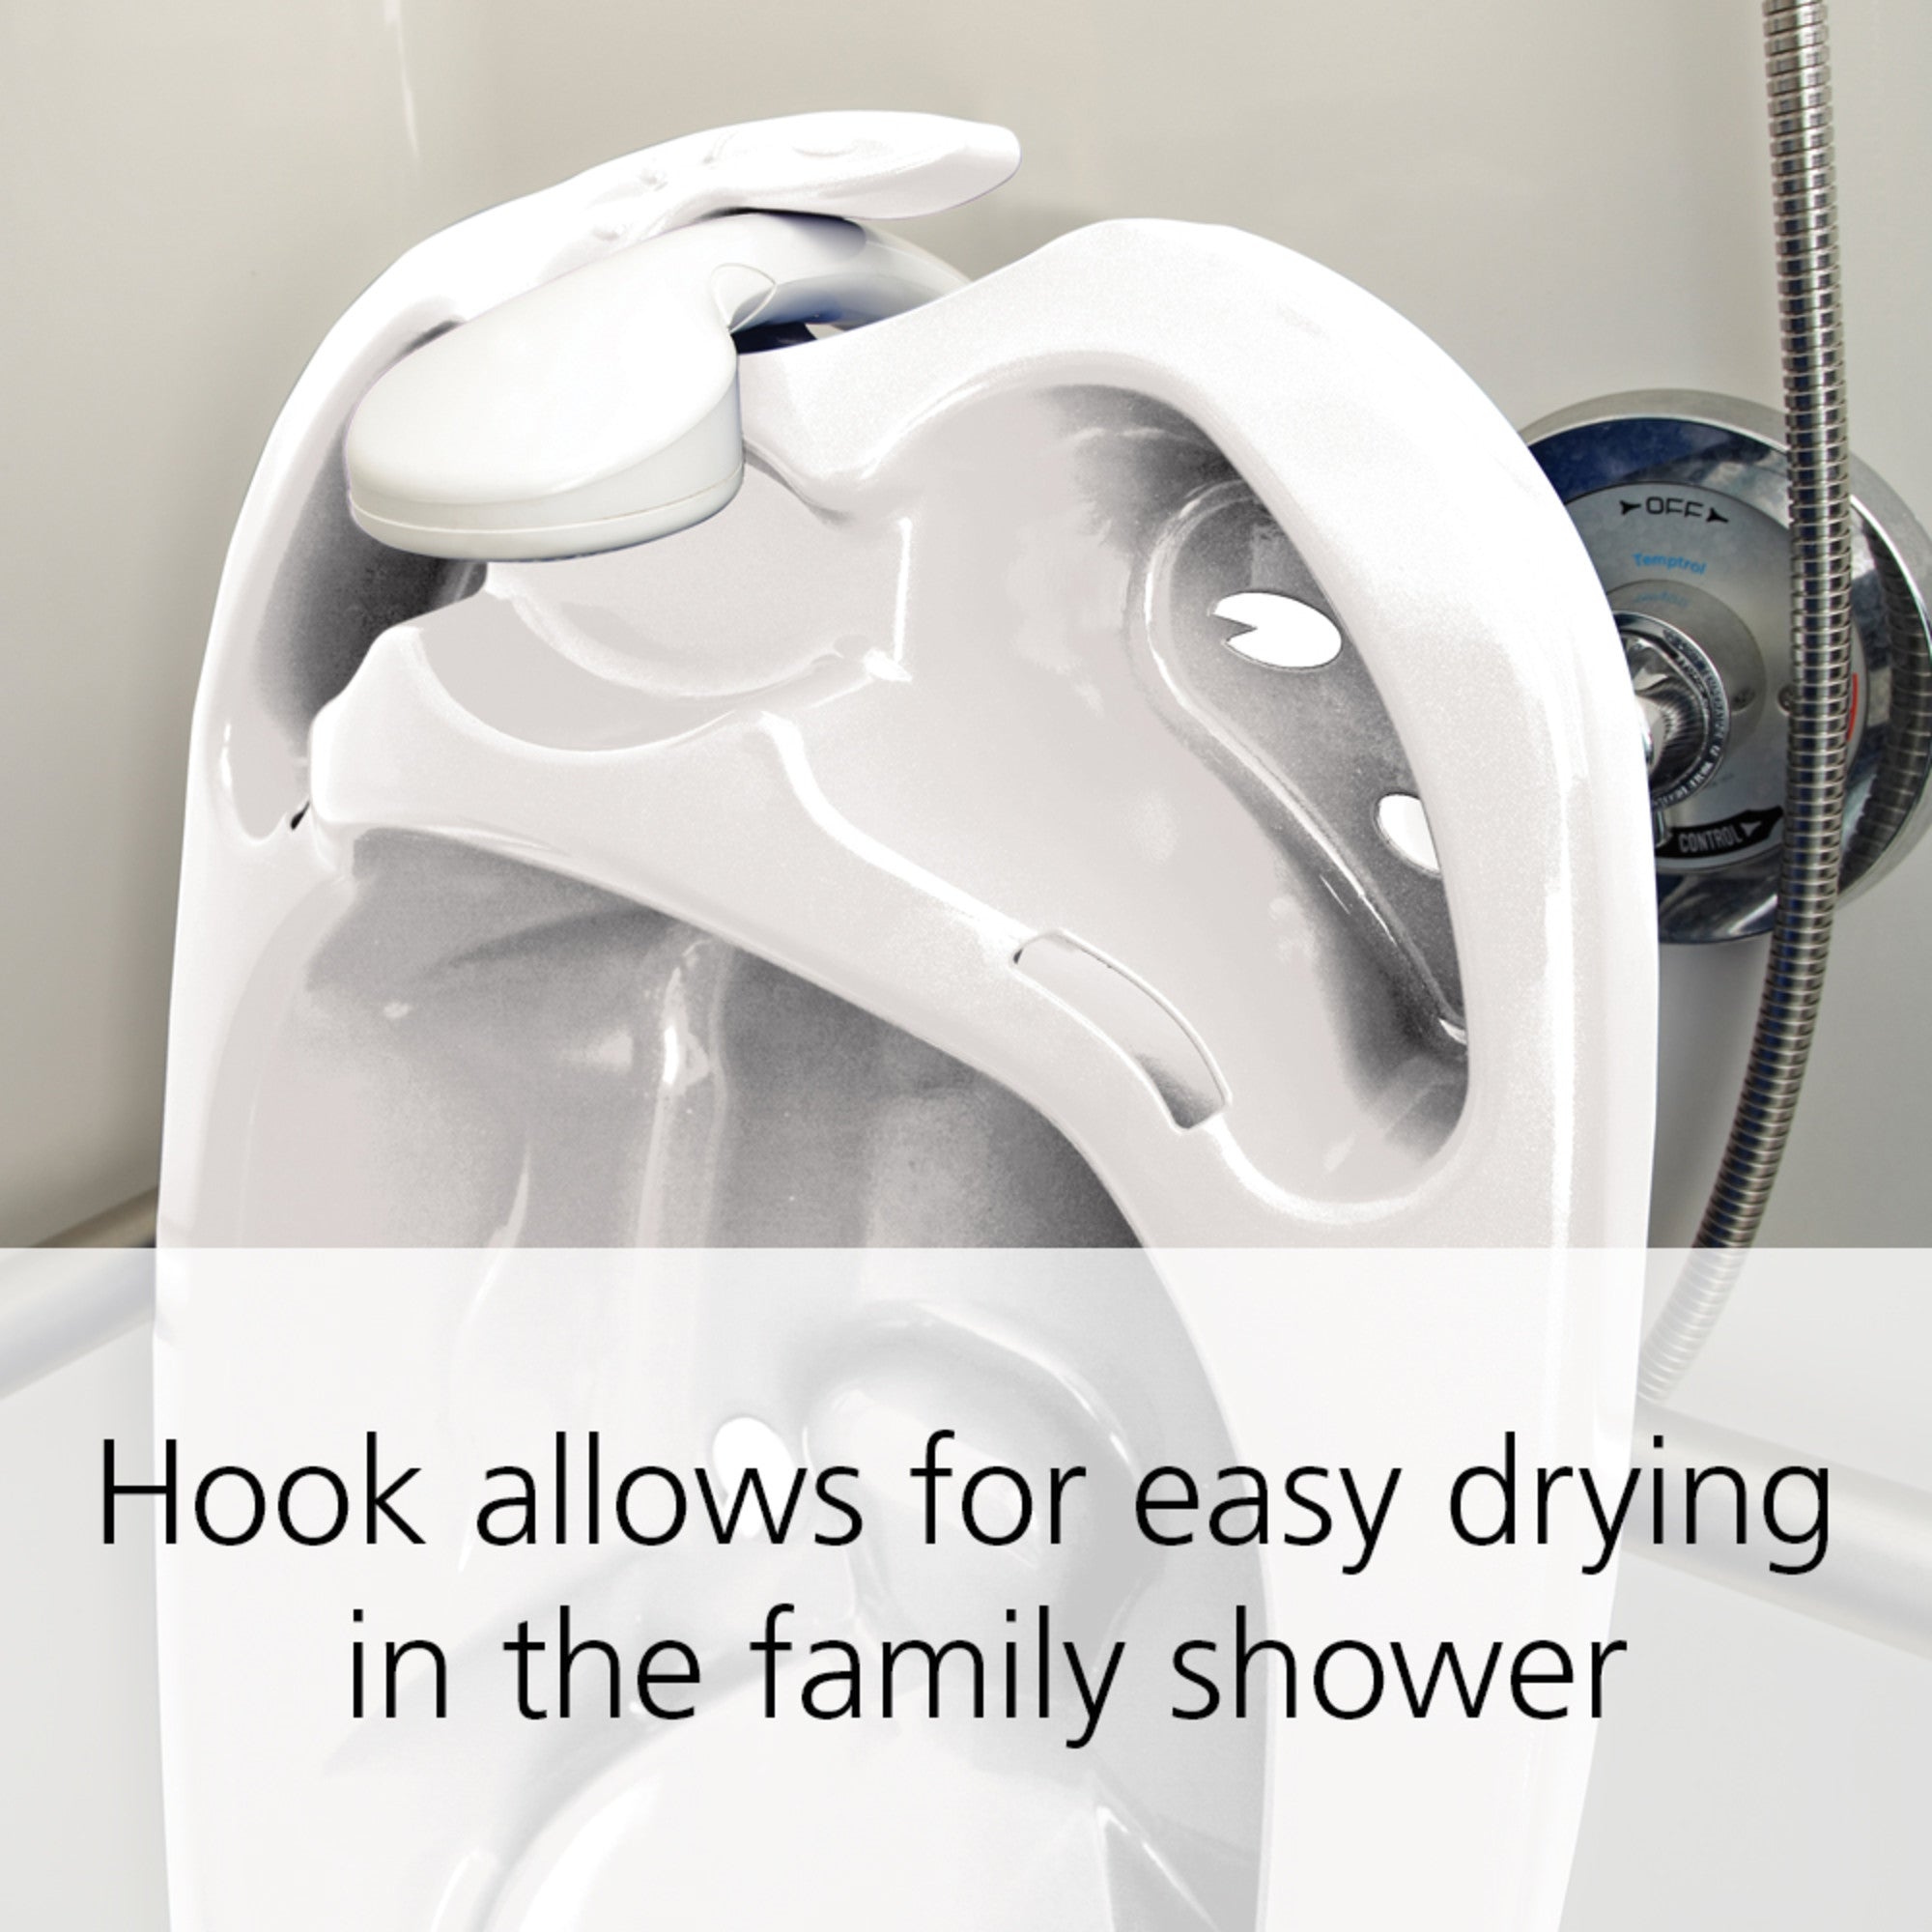 Newborn to Toddler Bathtub - hook allows for easy drying in the family shower